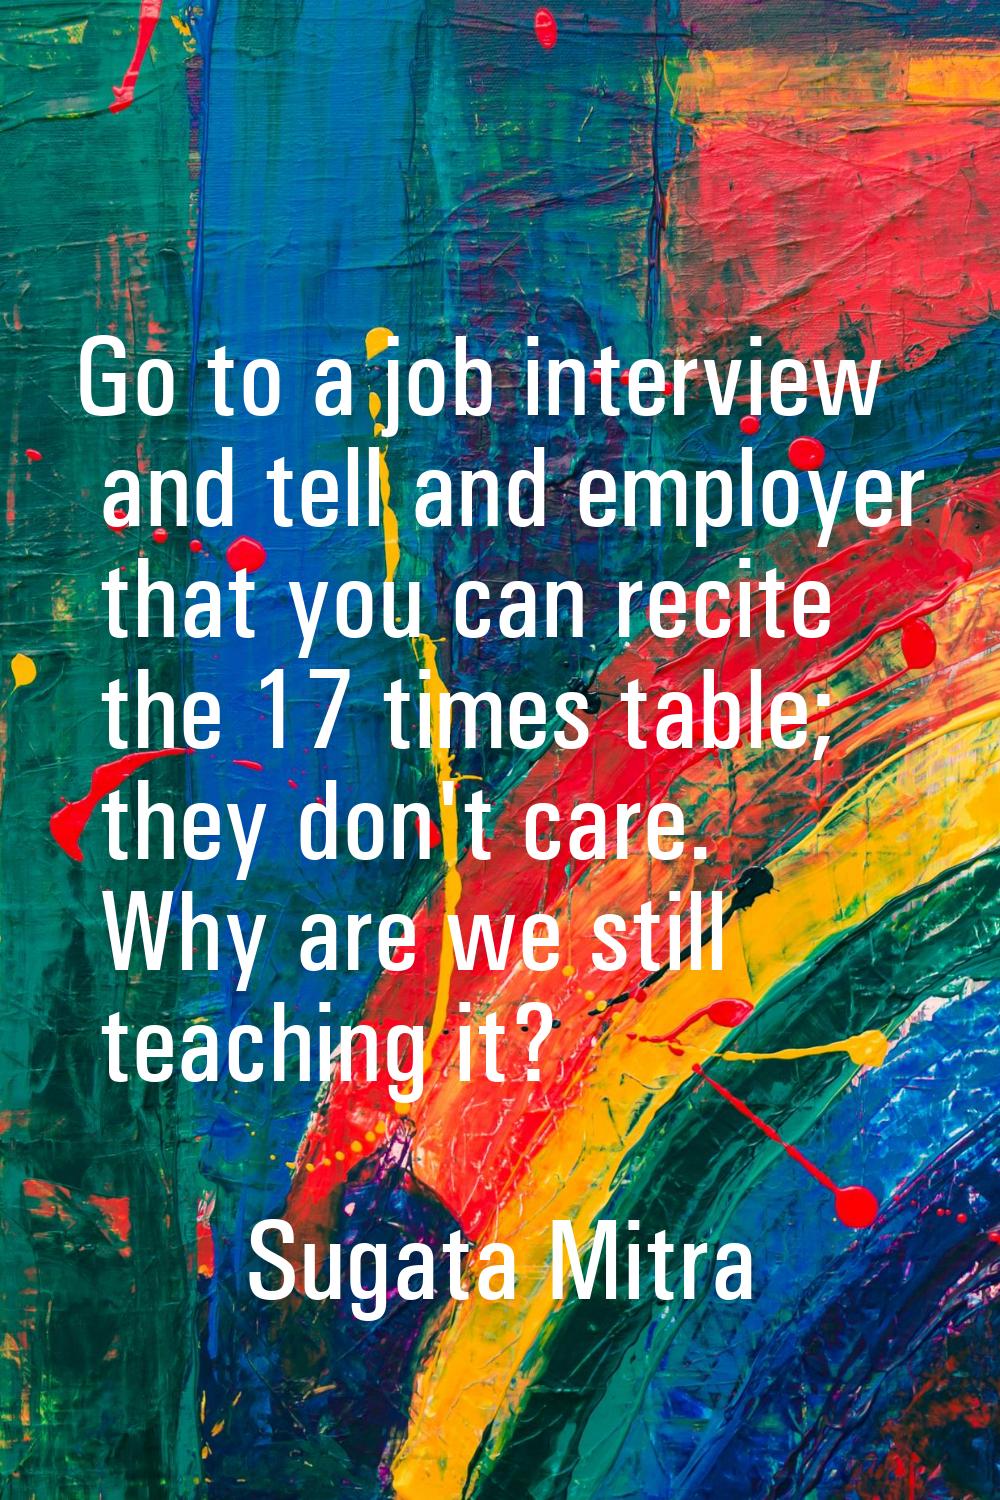 Go to a job interview and tell and employer that you can recite the 17 times table; they don't care